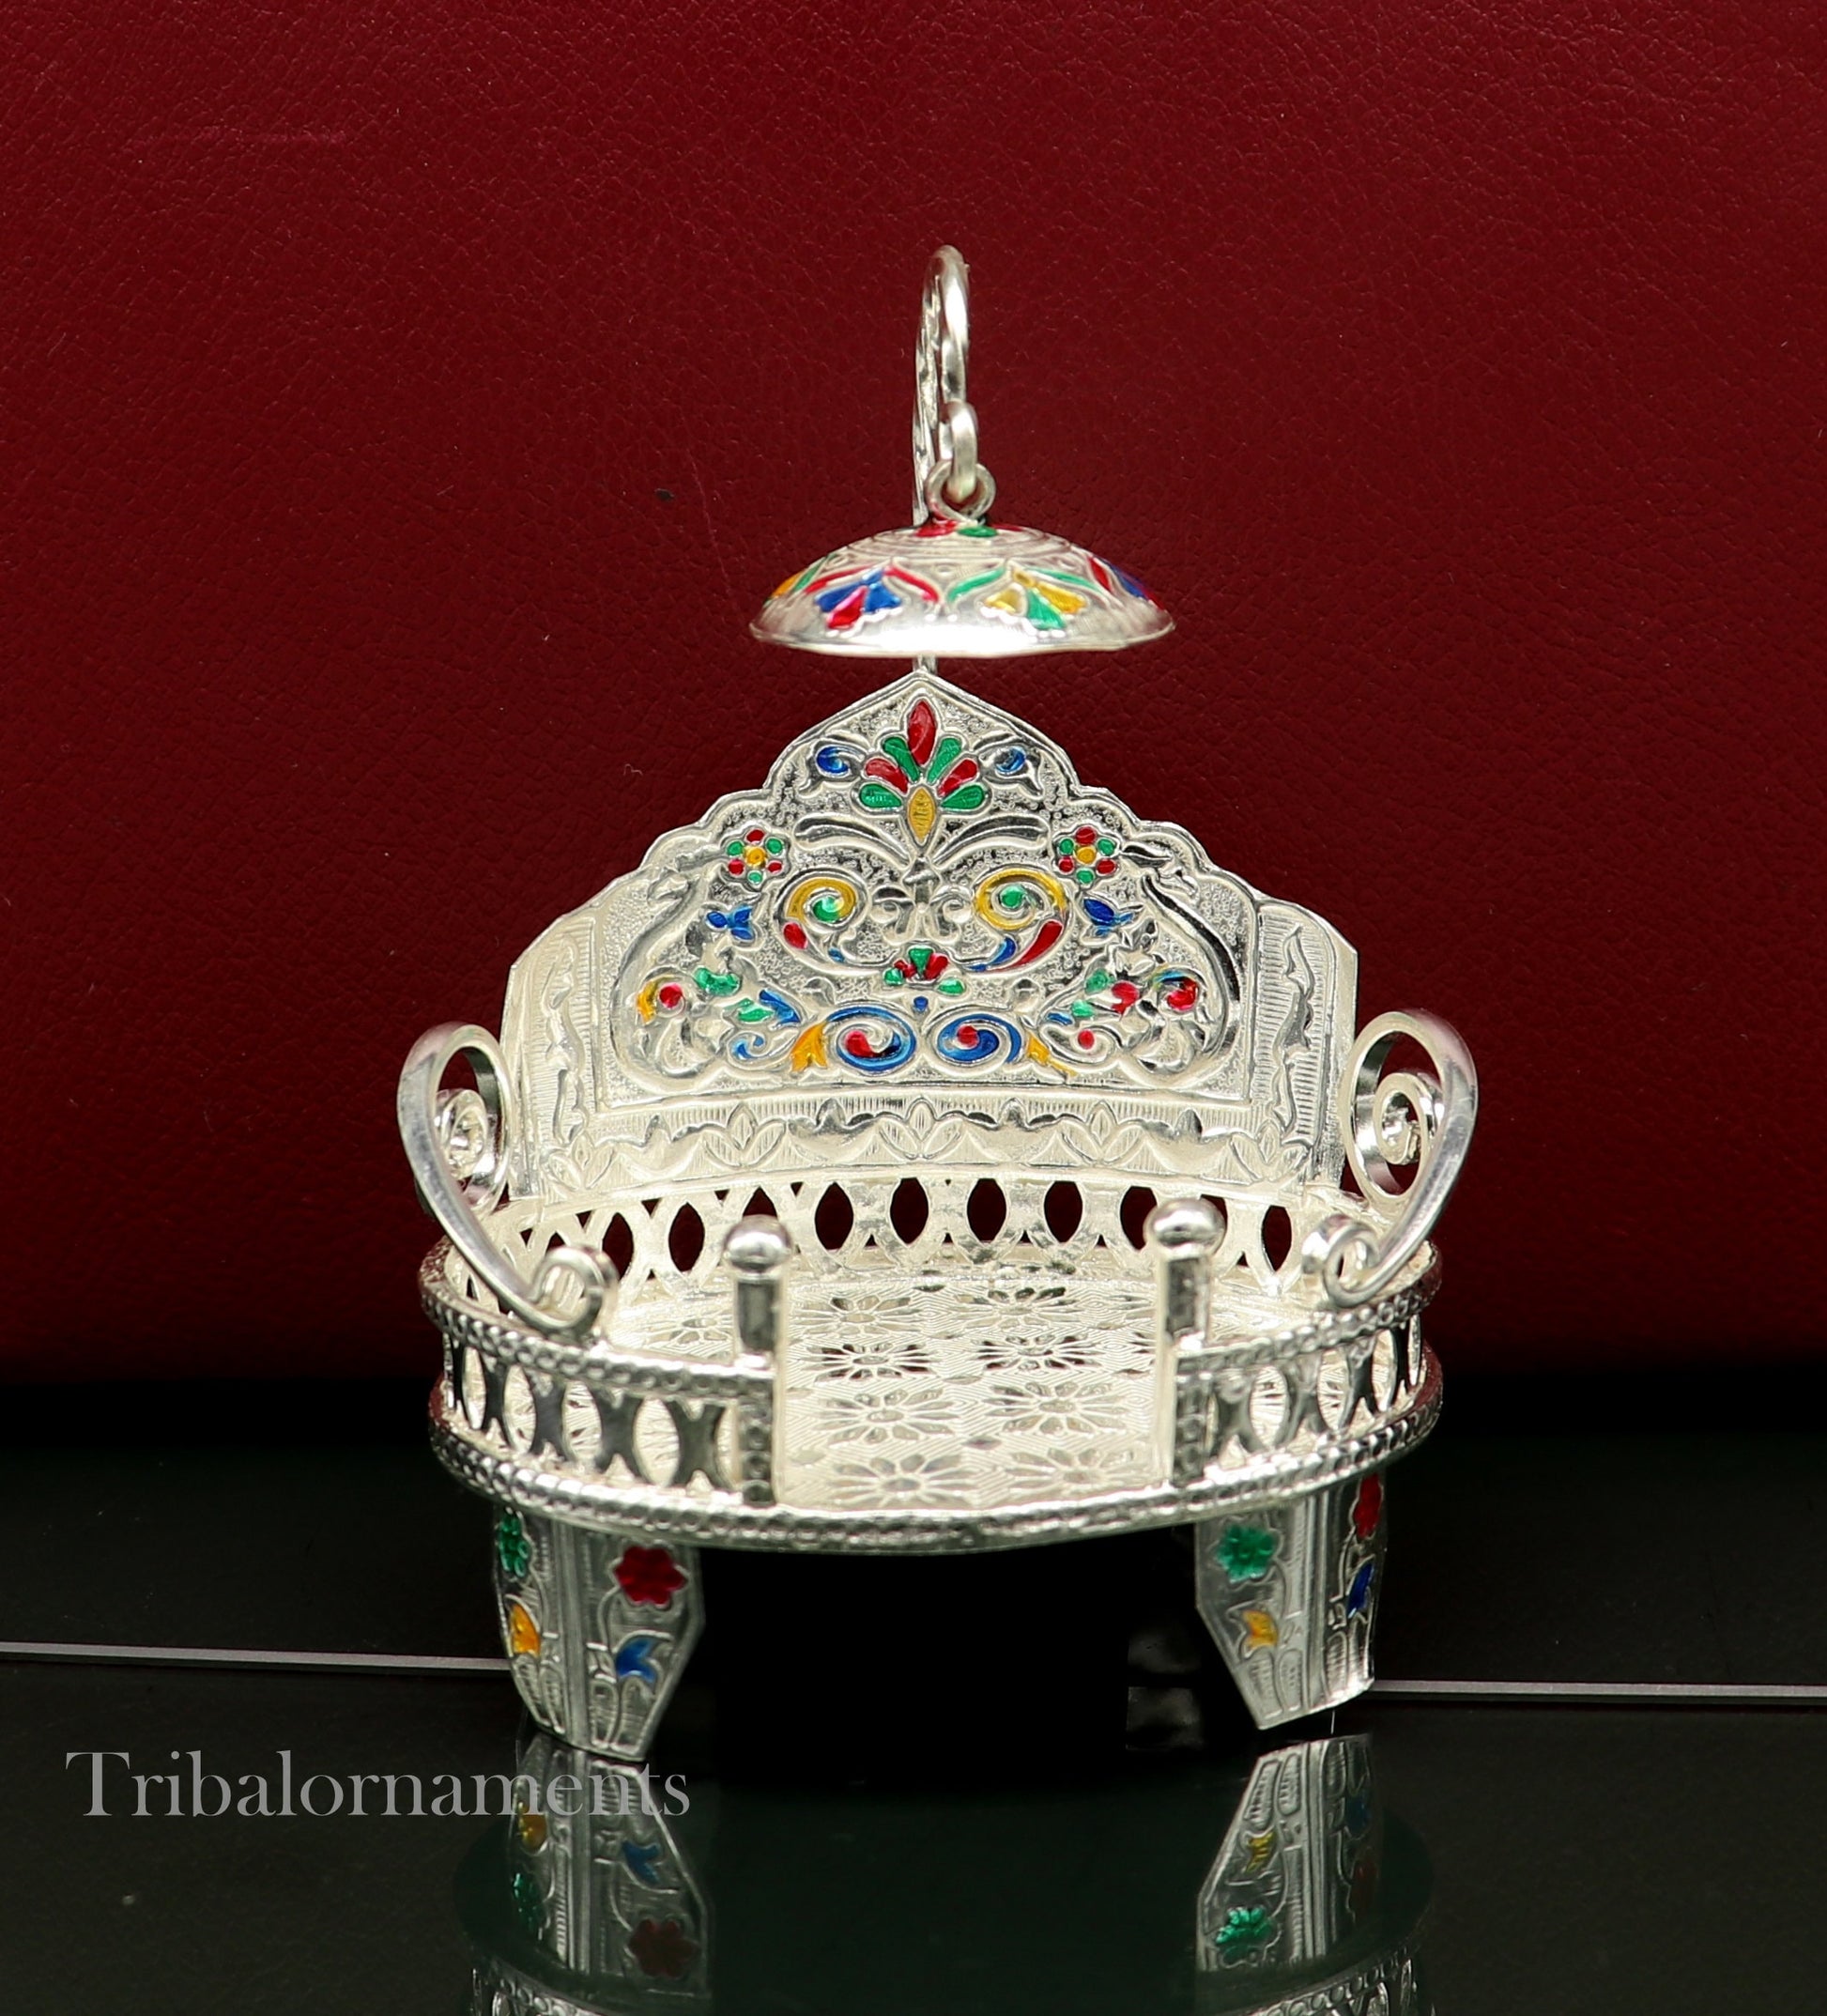 Silver throne 925 sterling silver handcrafted small sinhasan, idol god throne, god statue's stand chair, temple puja god article su526 - TRIBAL ORNAMENTS